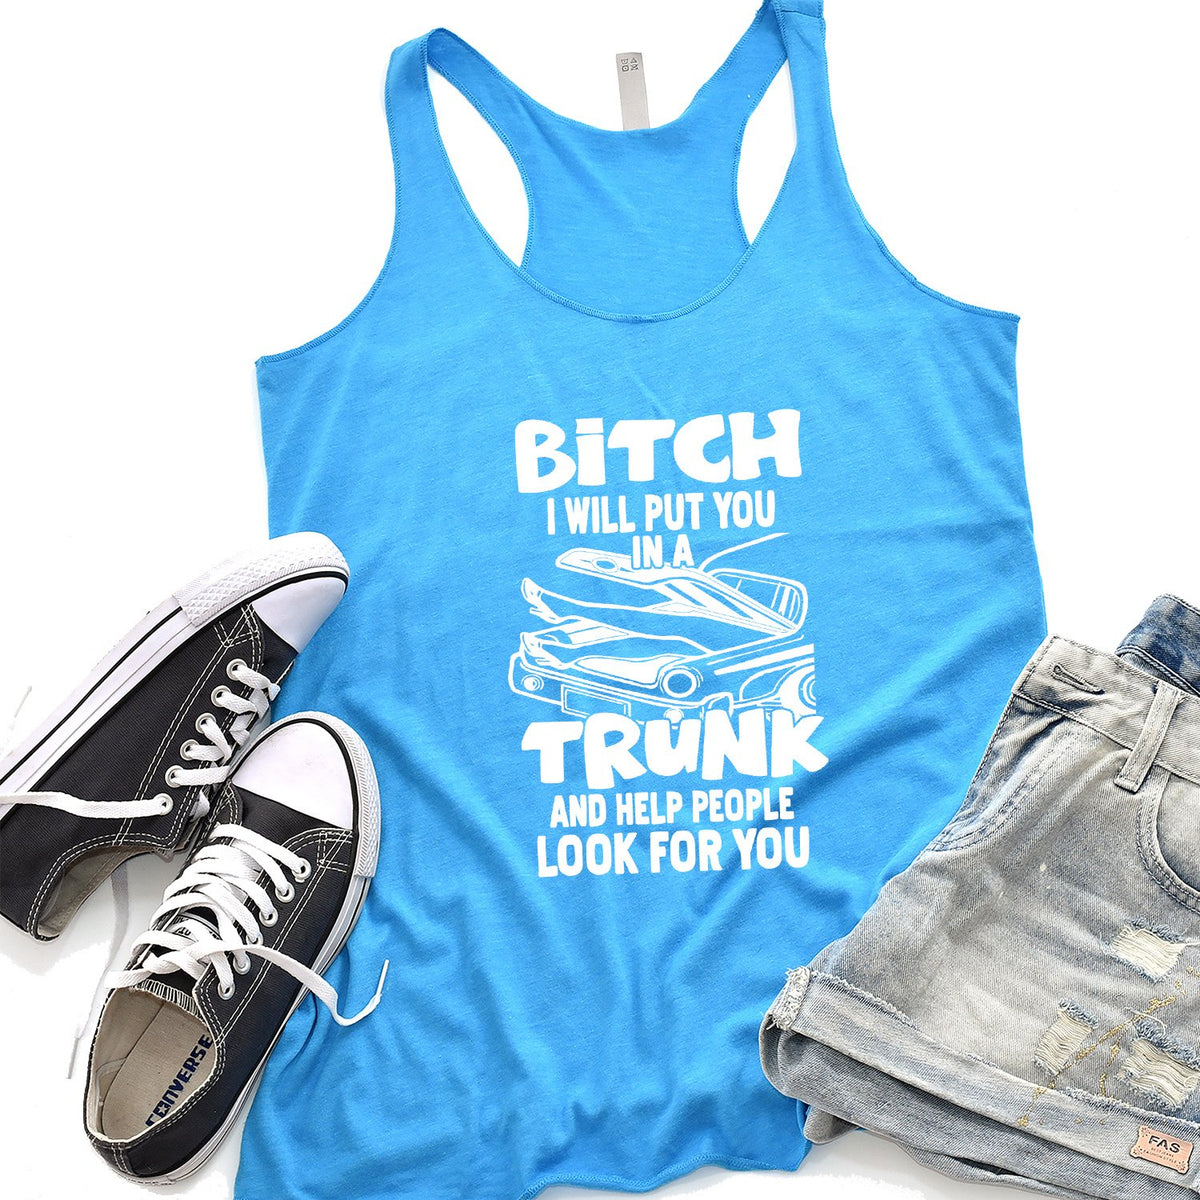 Bitch I Will Put You in A Trunk and Help People Look For You - Tank Top Racerback